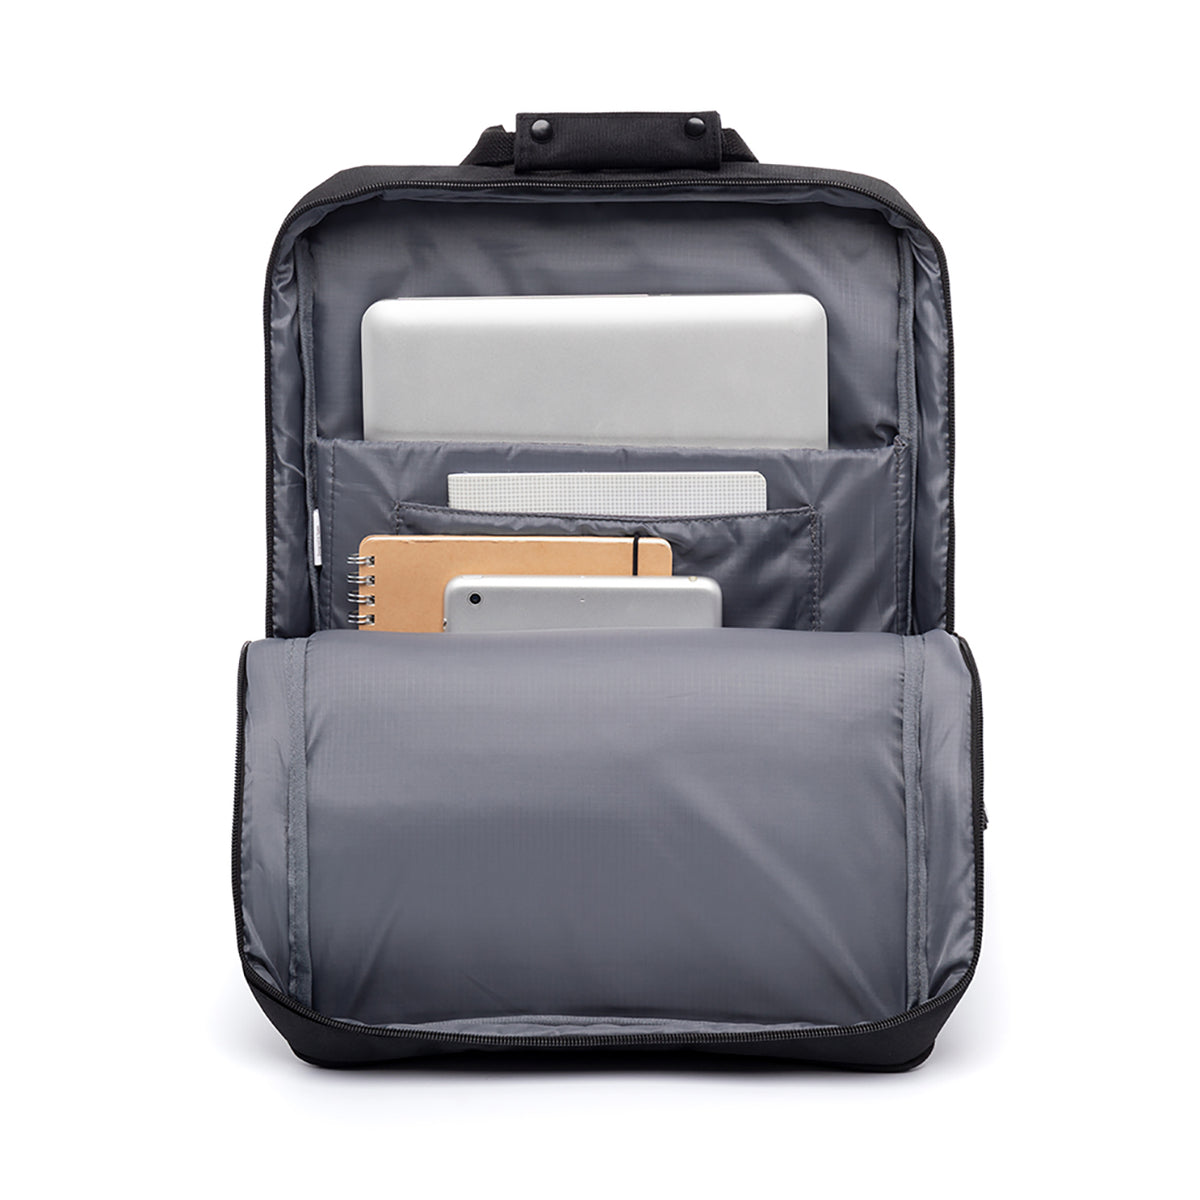 Daily 15" Backpack Black, view of internal compartments